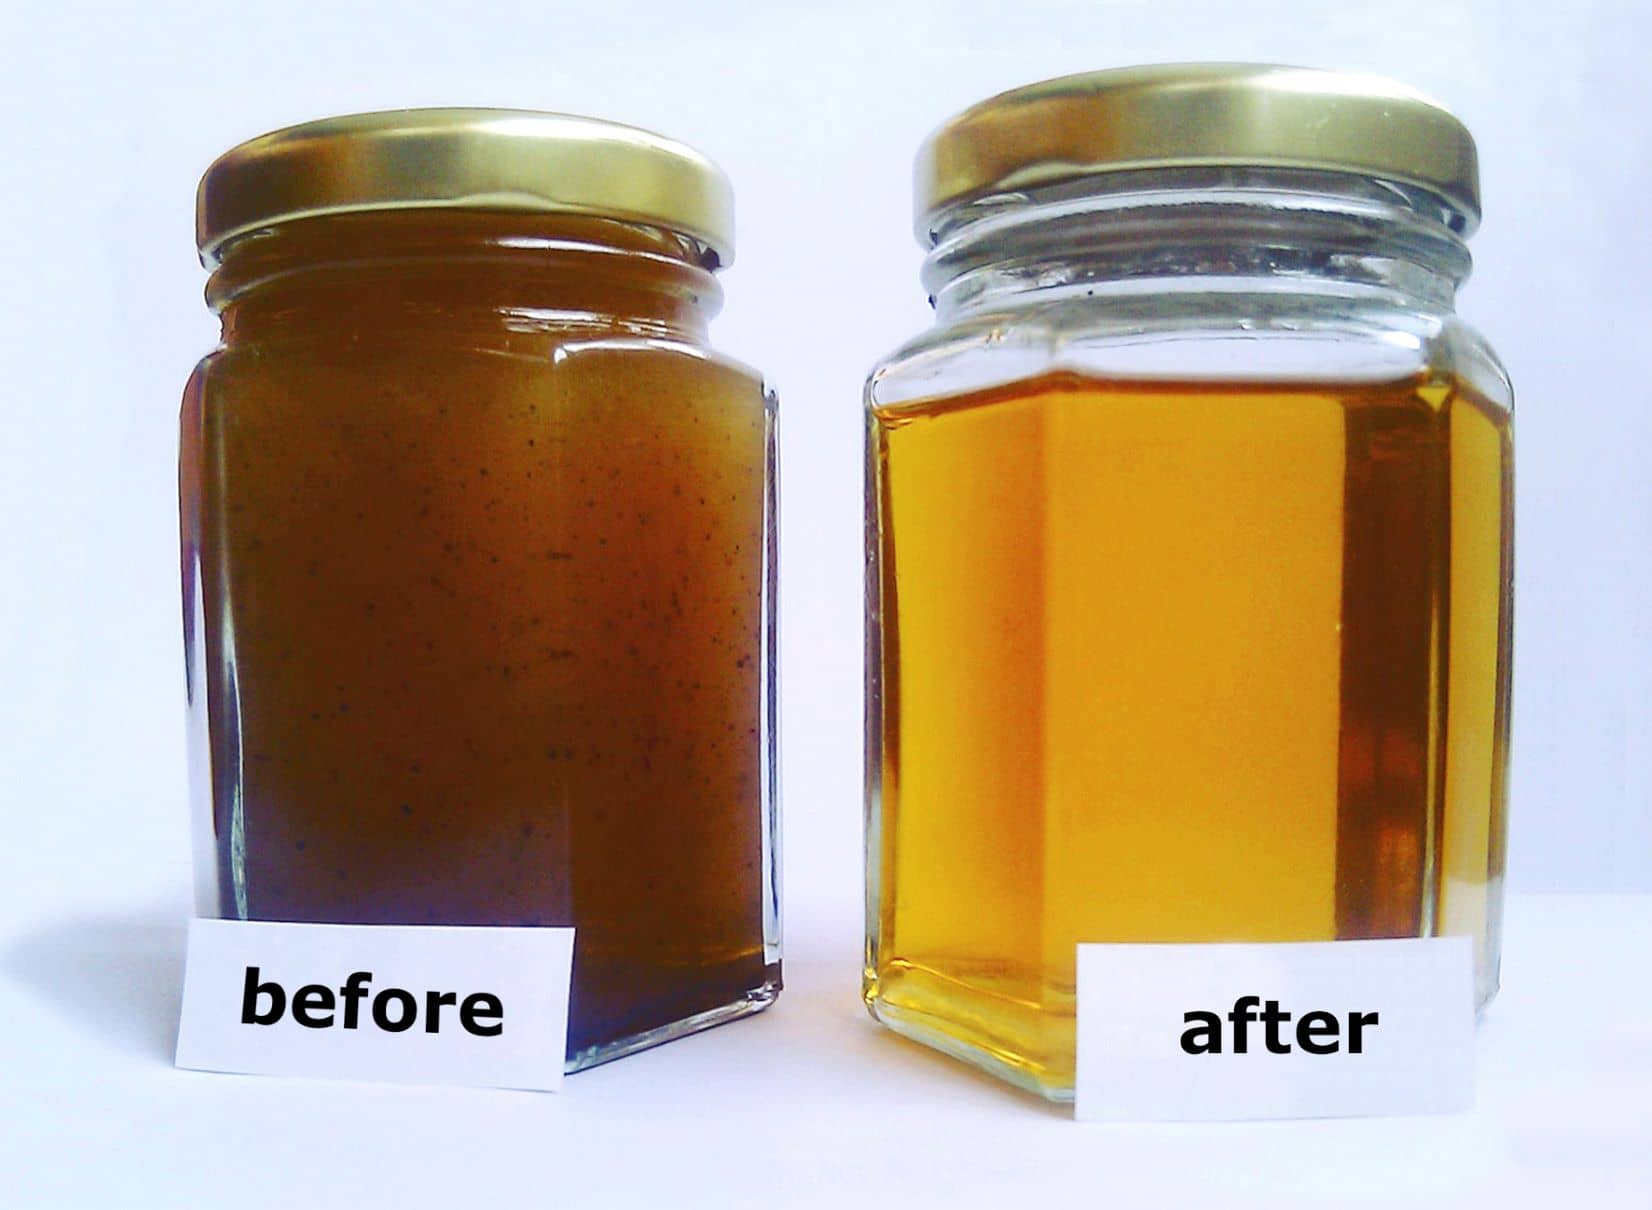 Oil before and after